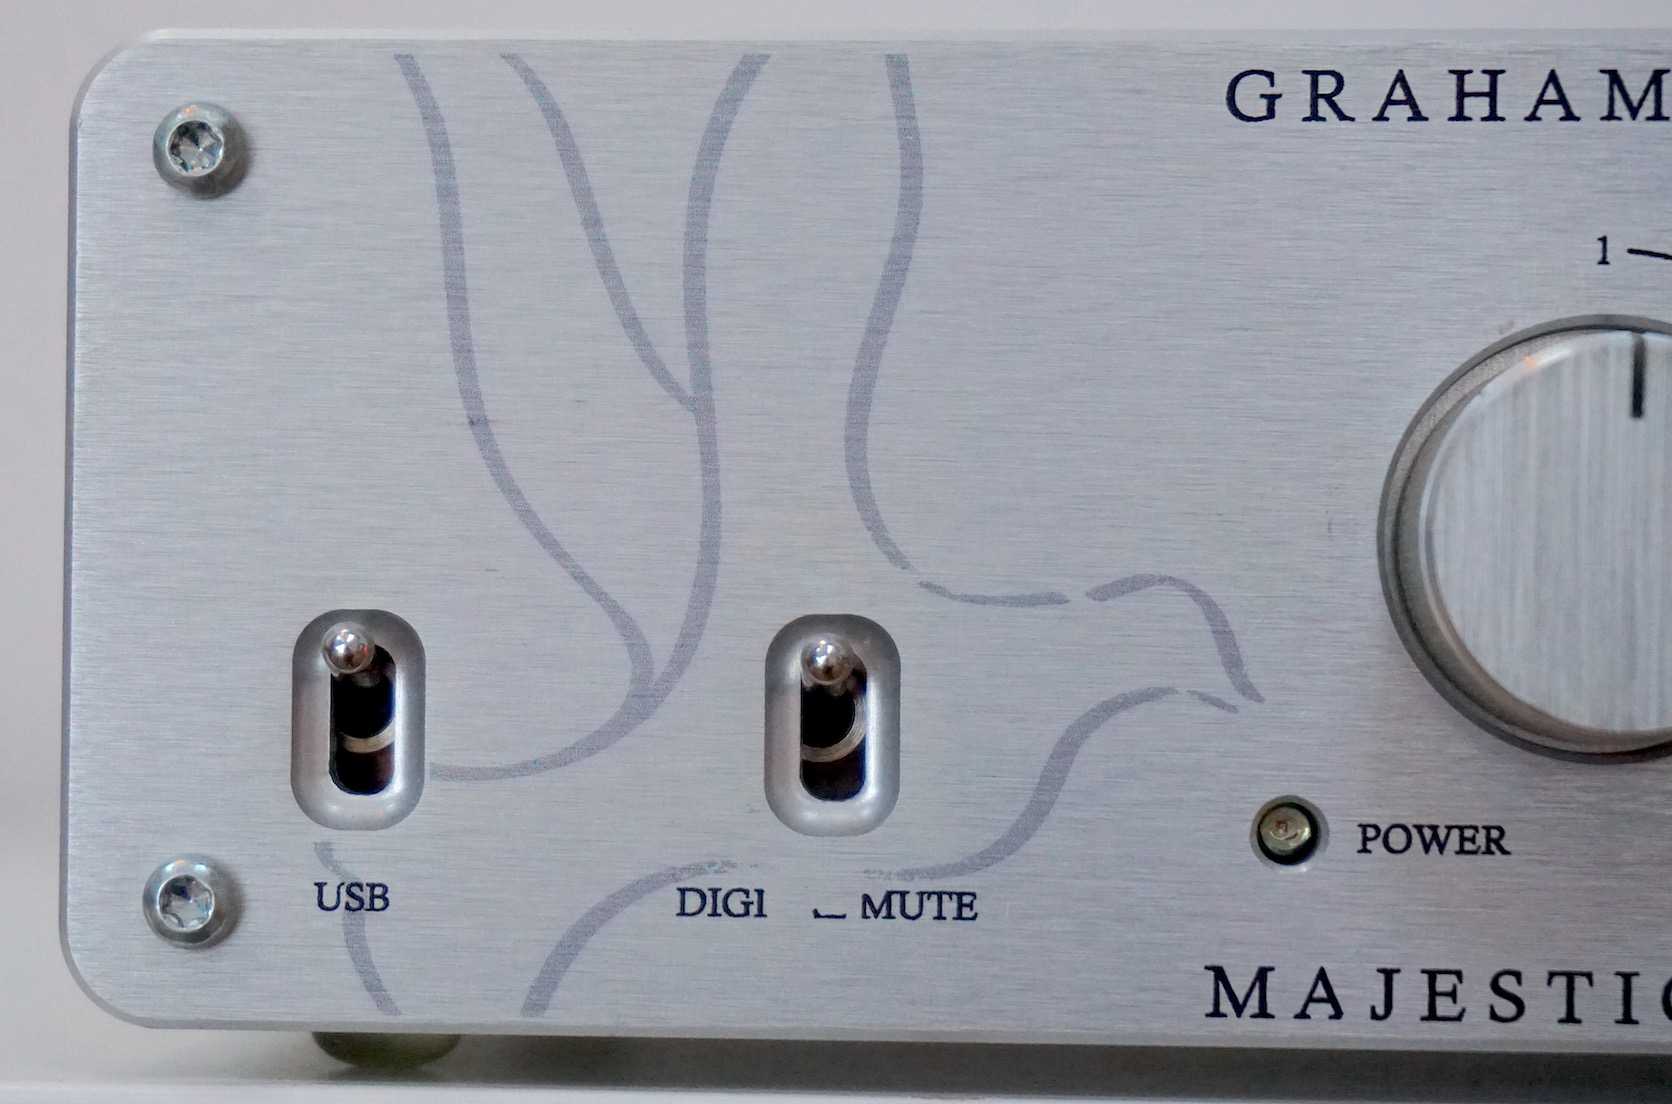 MAJESTIC DAC FROM GRAHAM SLEE